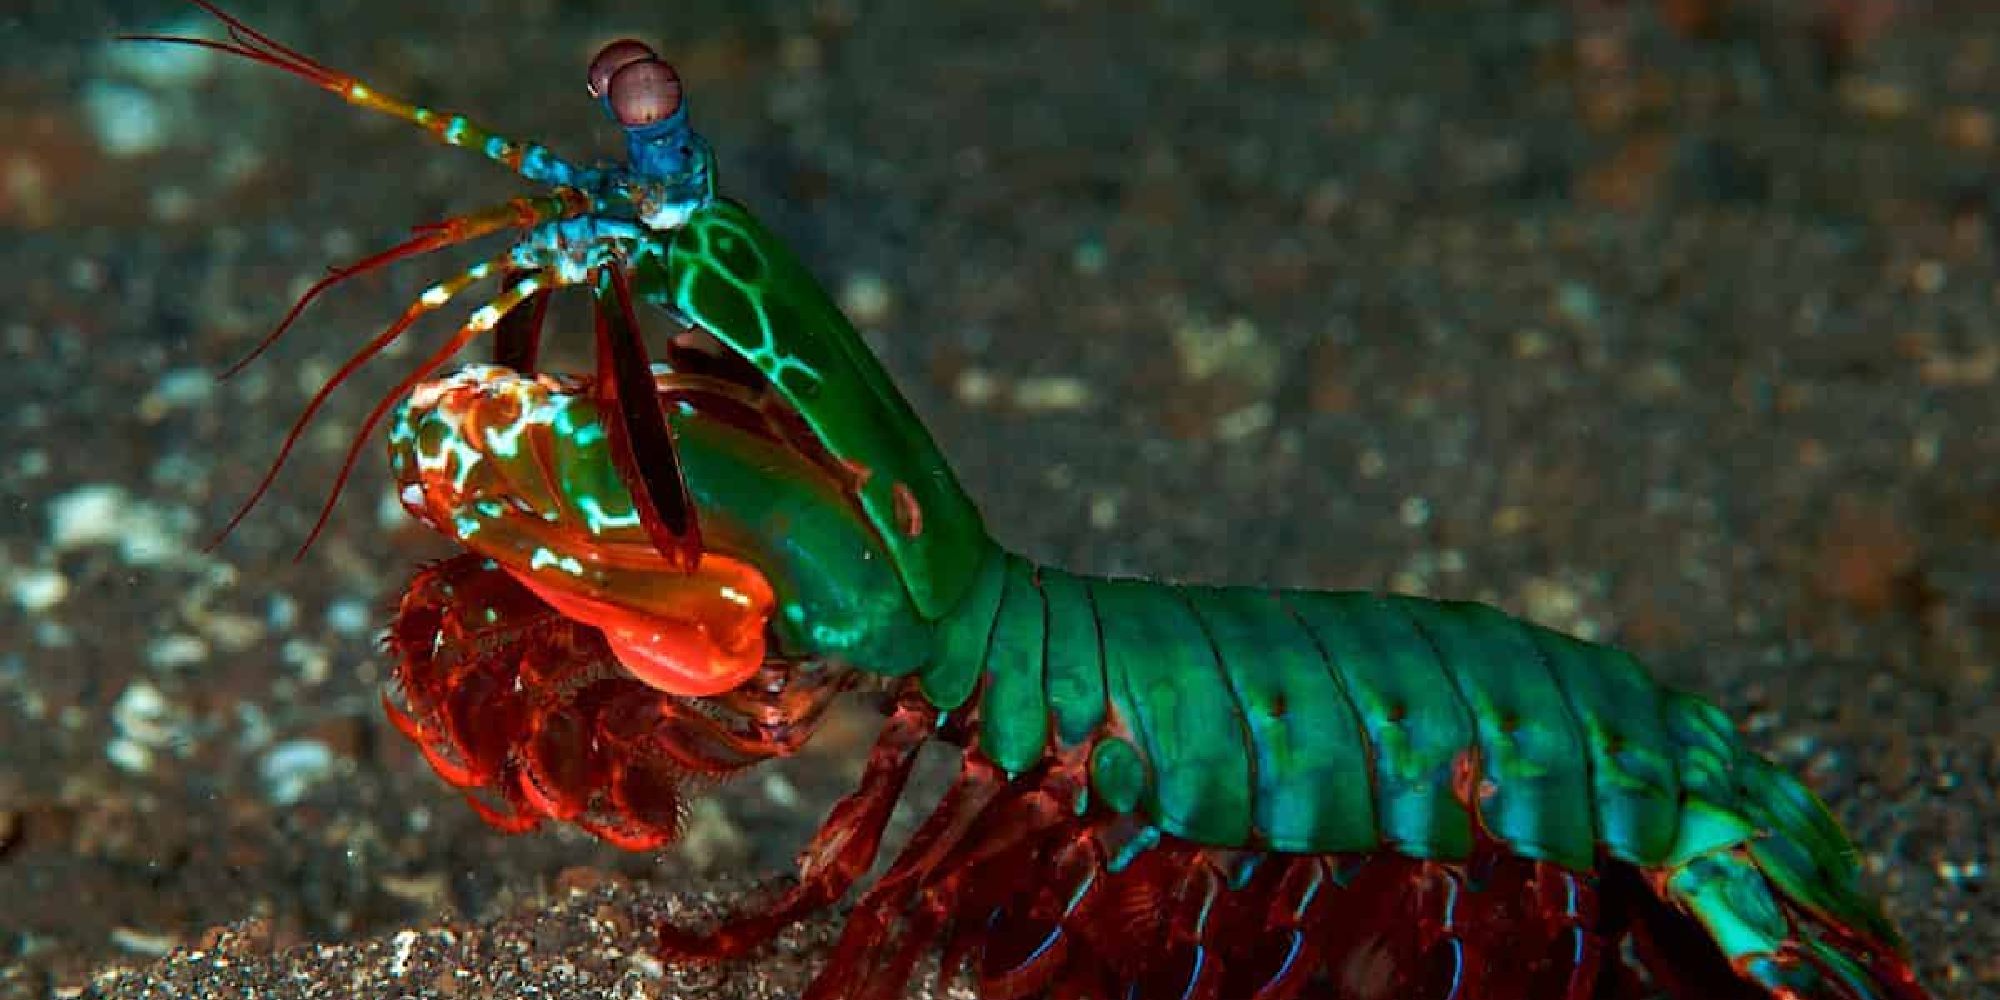 A vibrantly-colored mantis shrimp crawling in the ocean